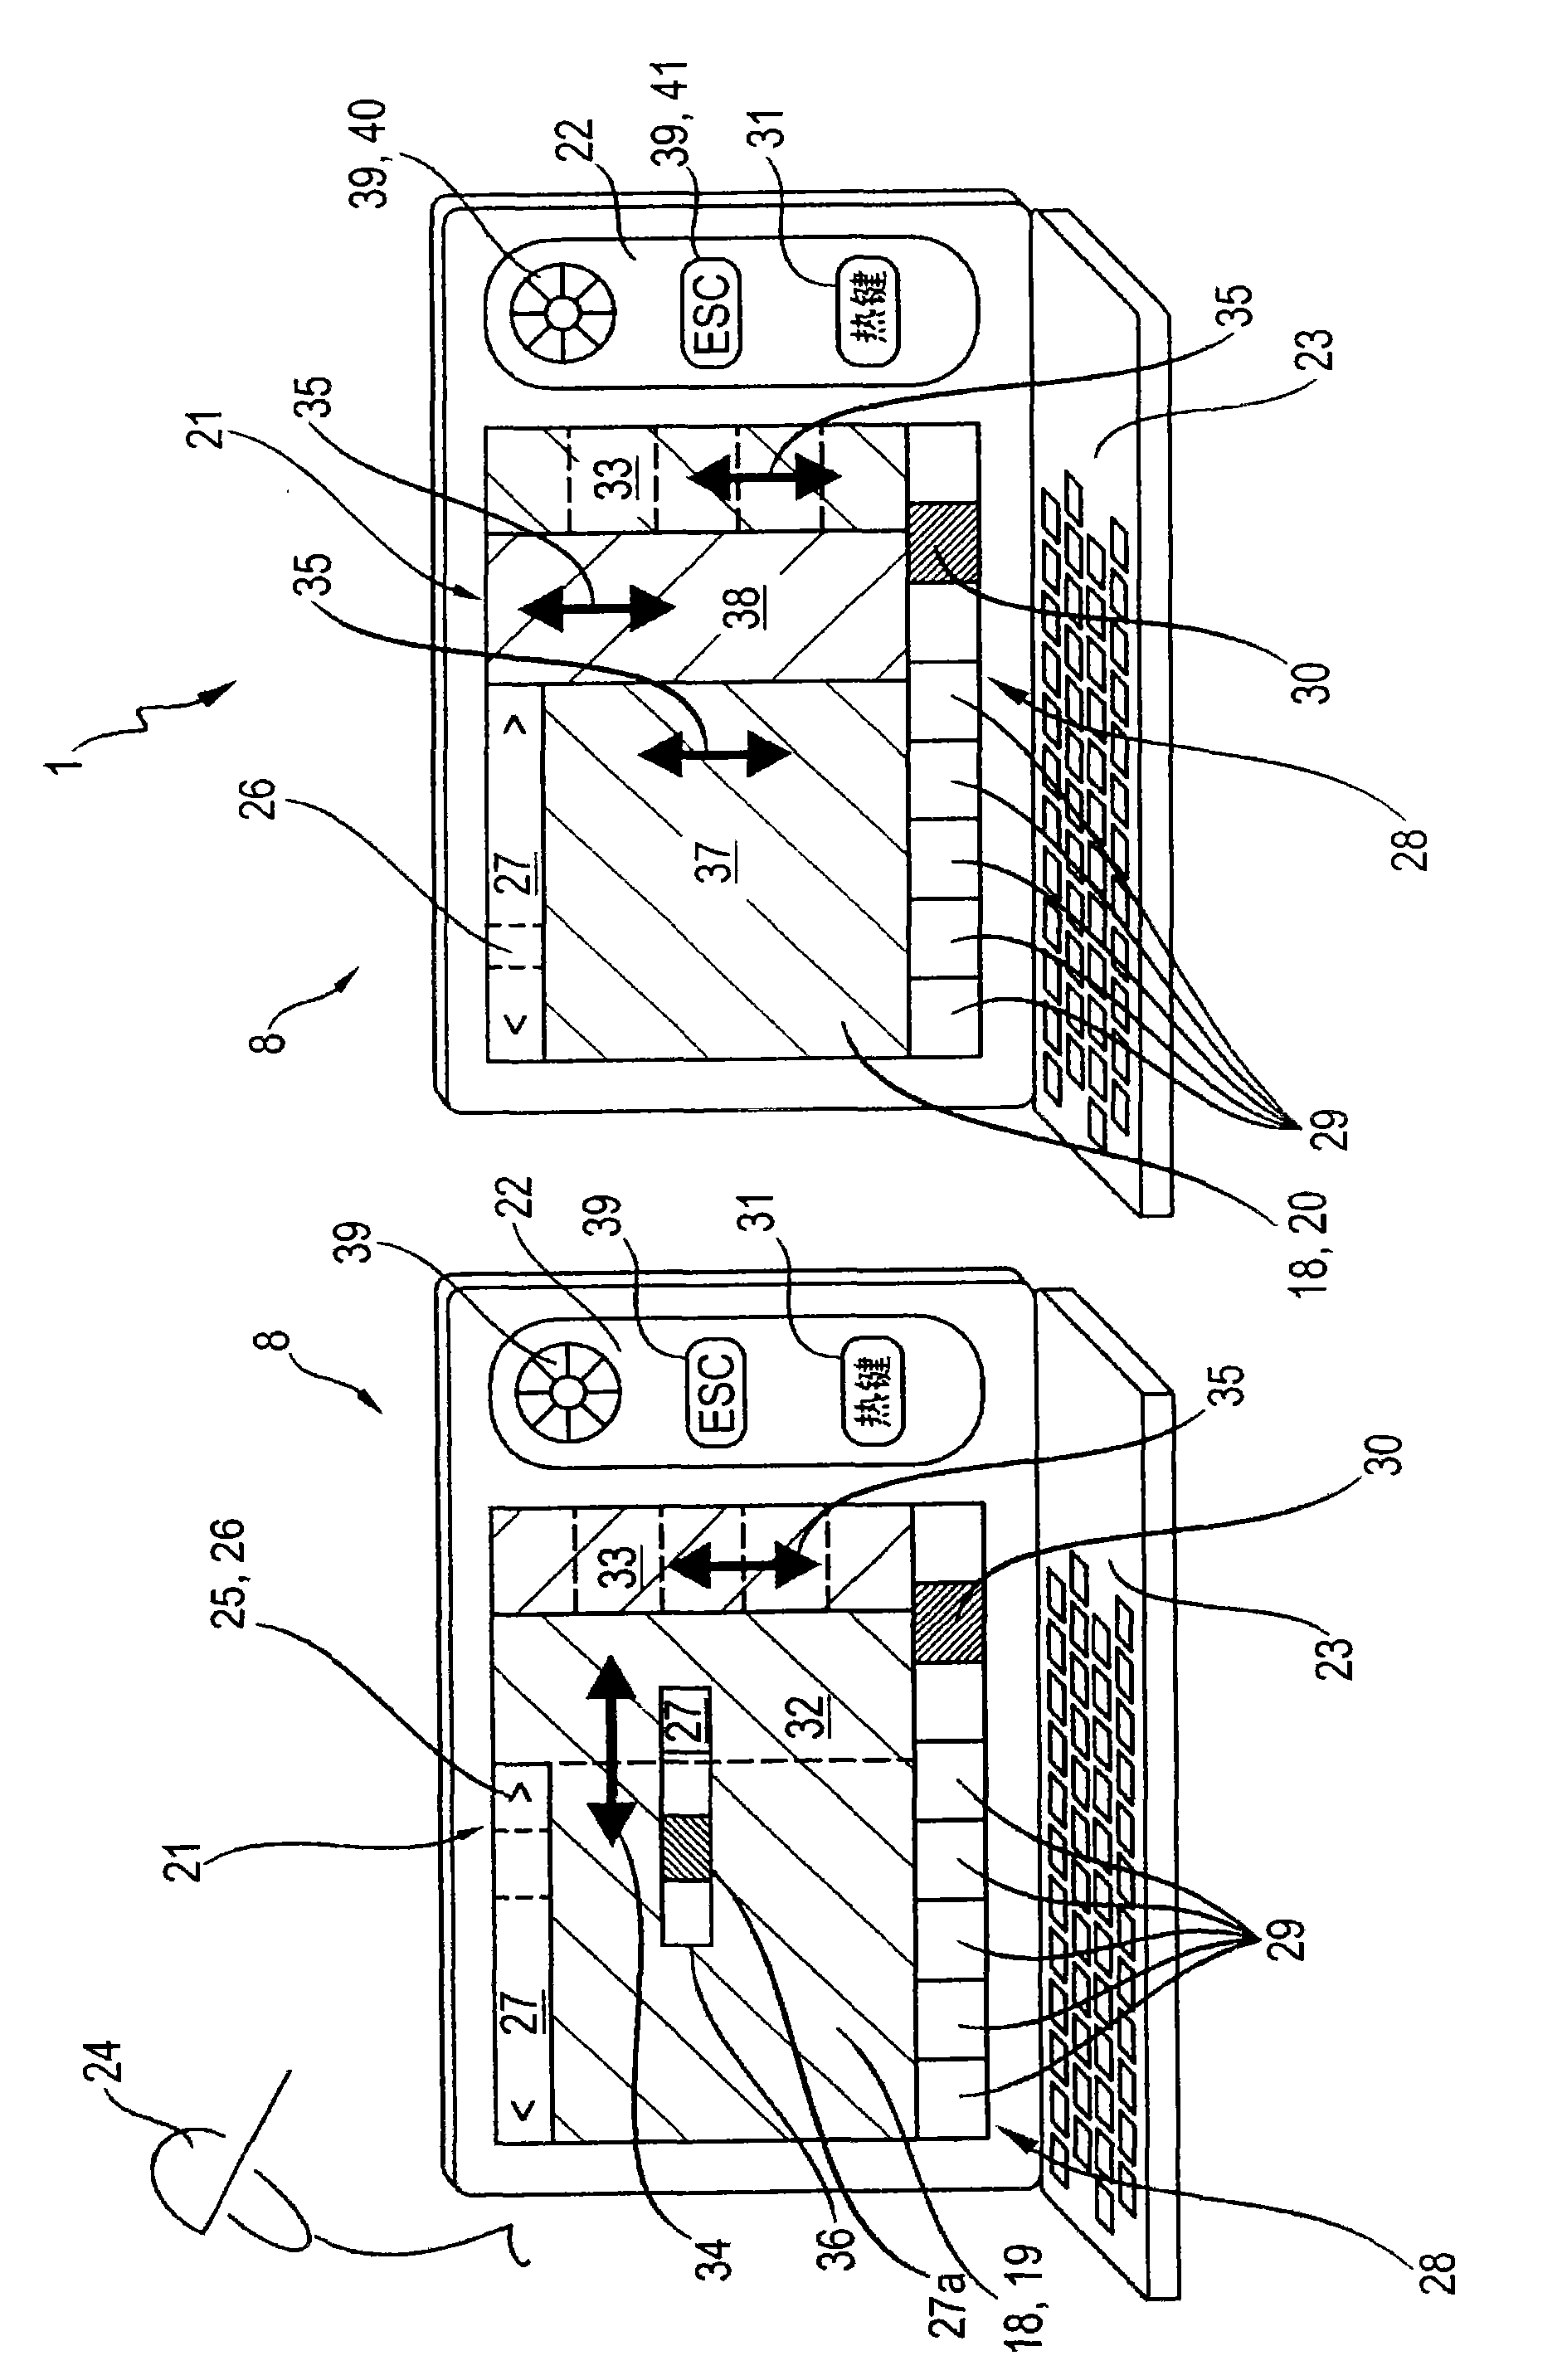 Display device for agricultural machines